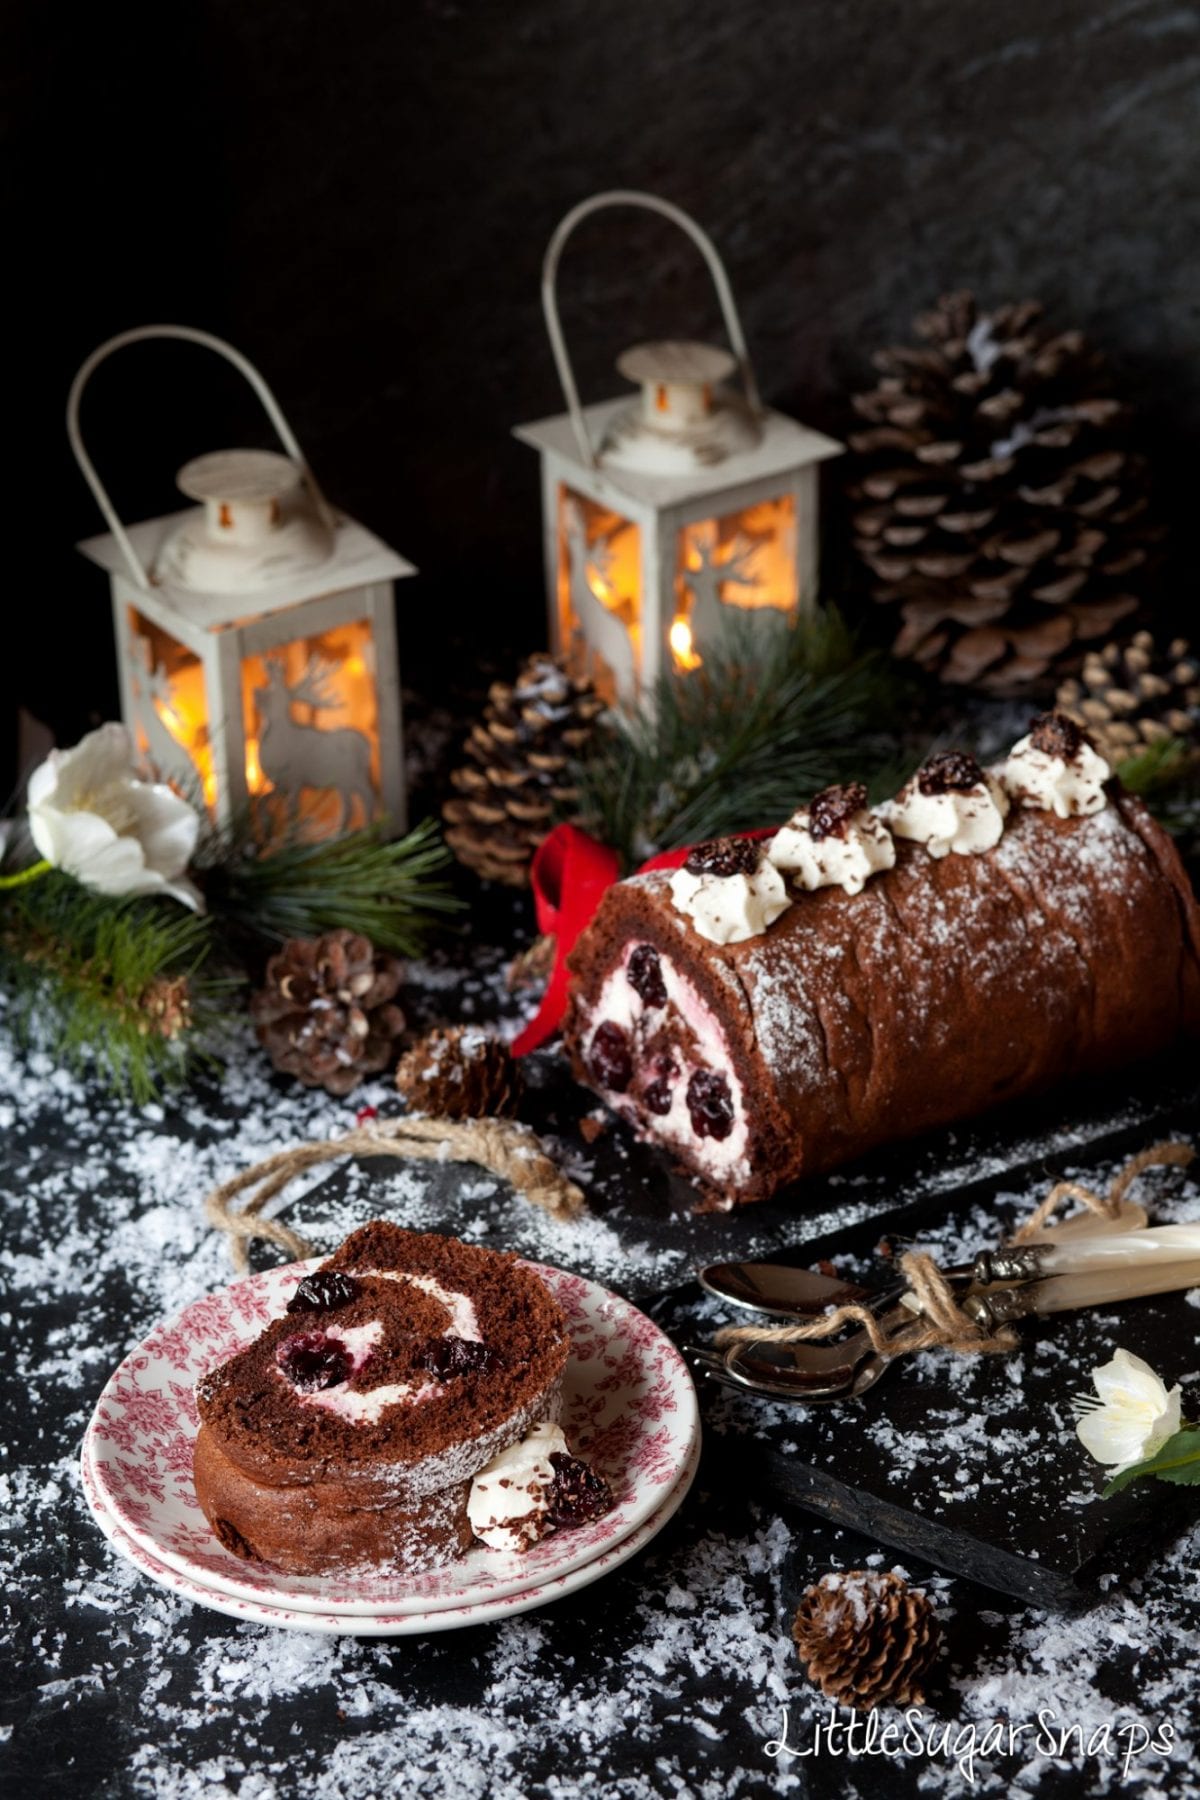 A slice of Black Forest Yule Log on small plates.